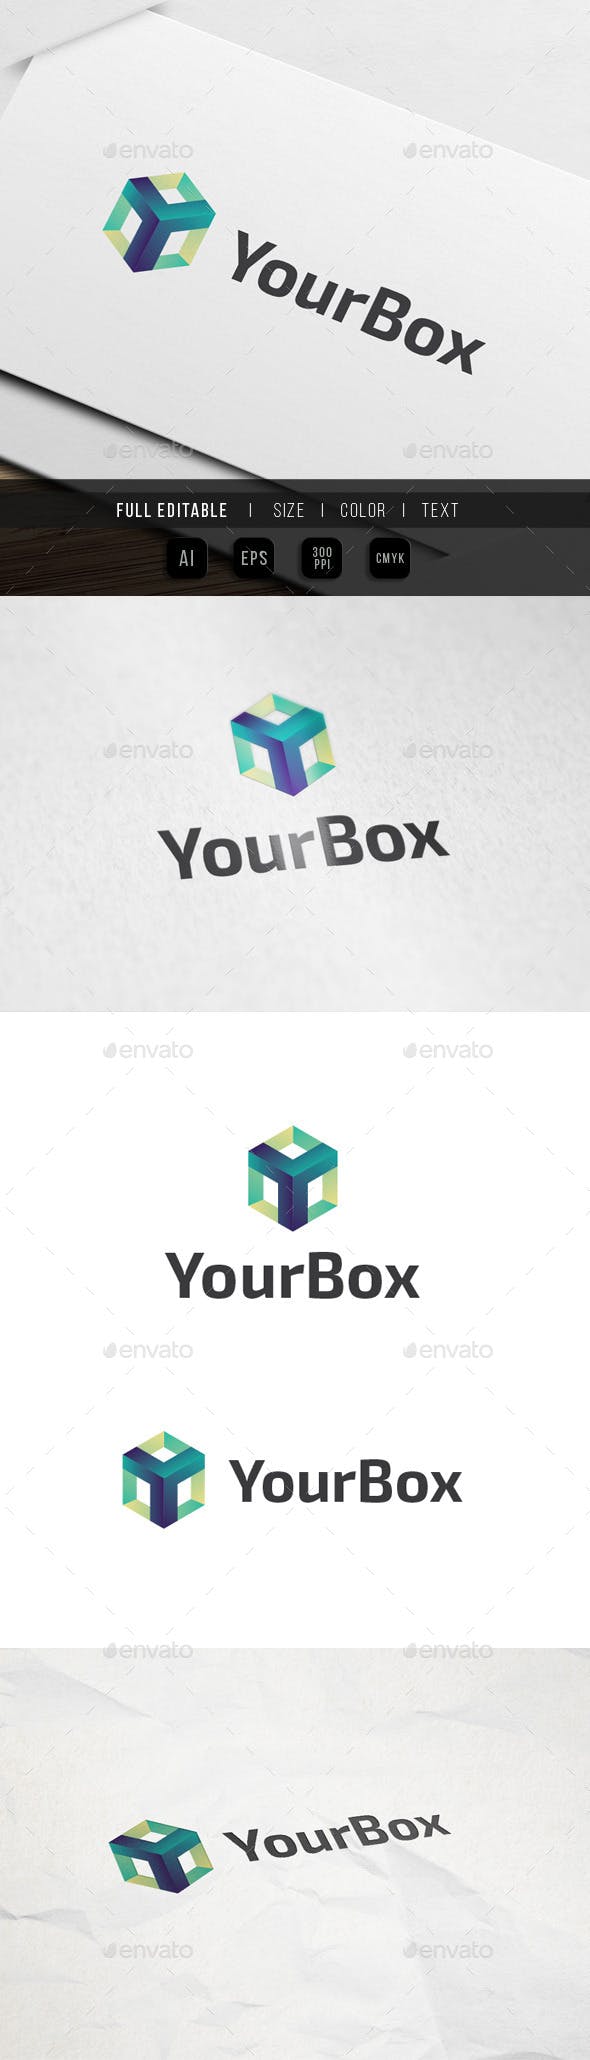 Box Letter Logo - Letter Y - Box tech Logo by yip87 | GraphicRiver